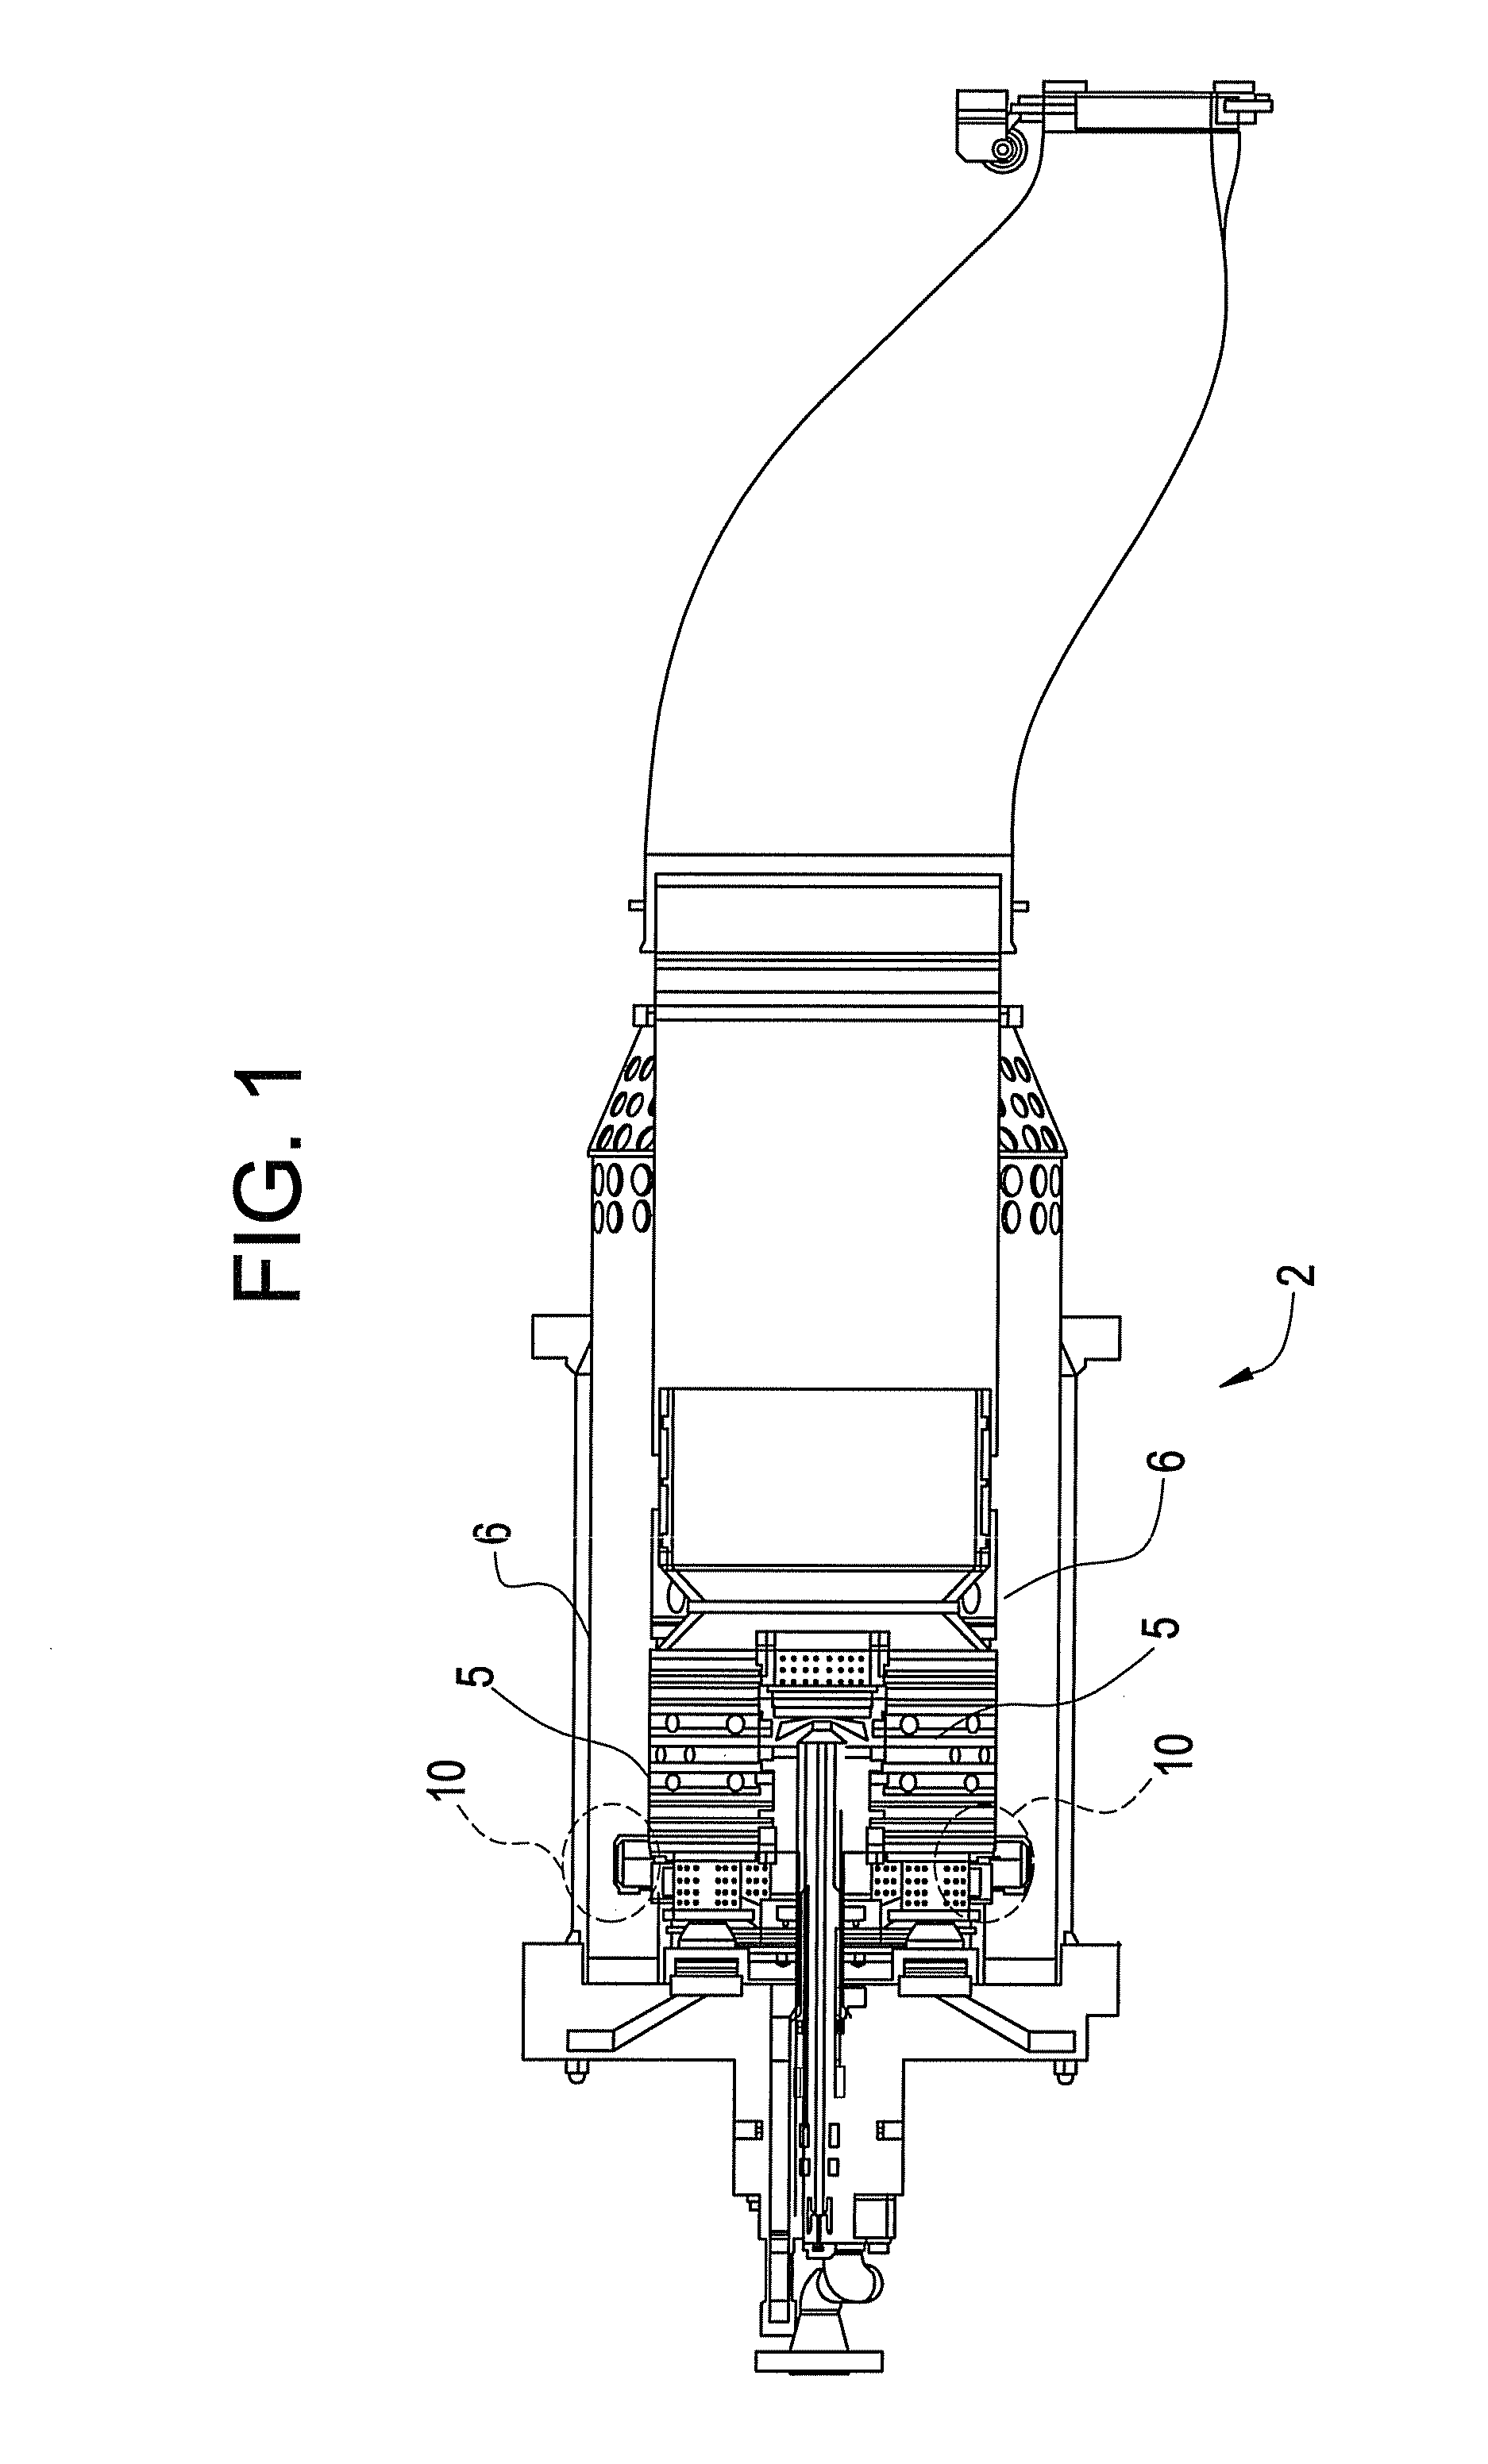 Combustion liner stop in a gas turbine